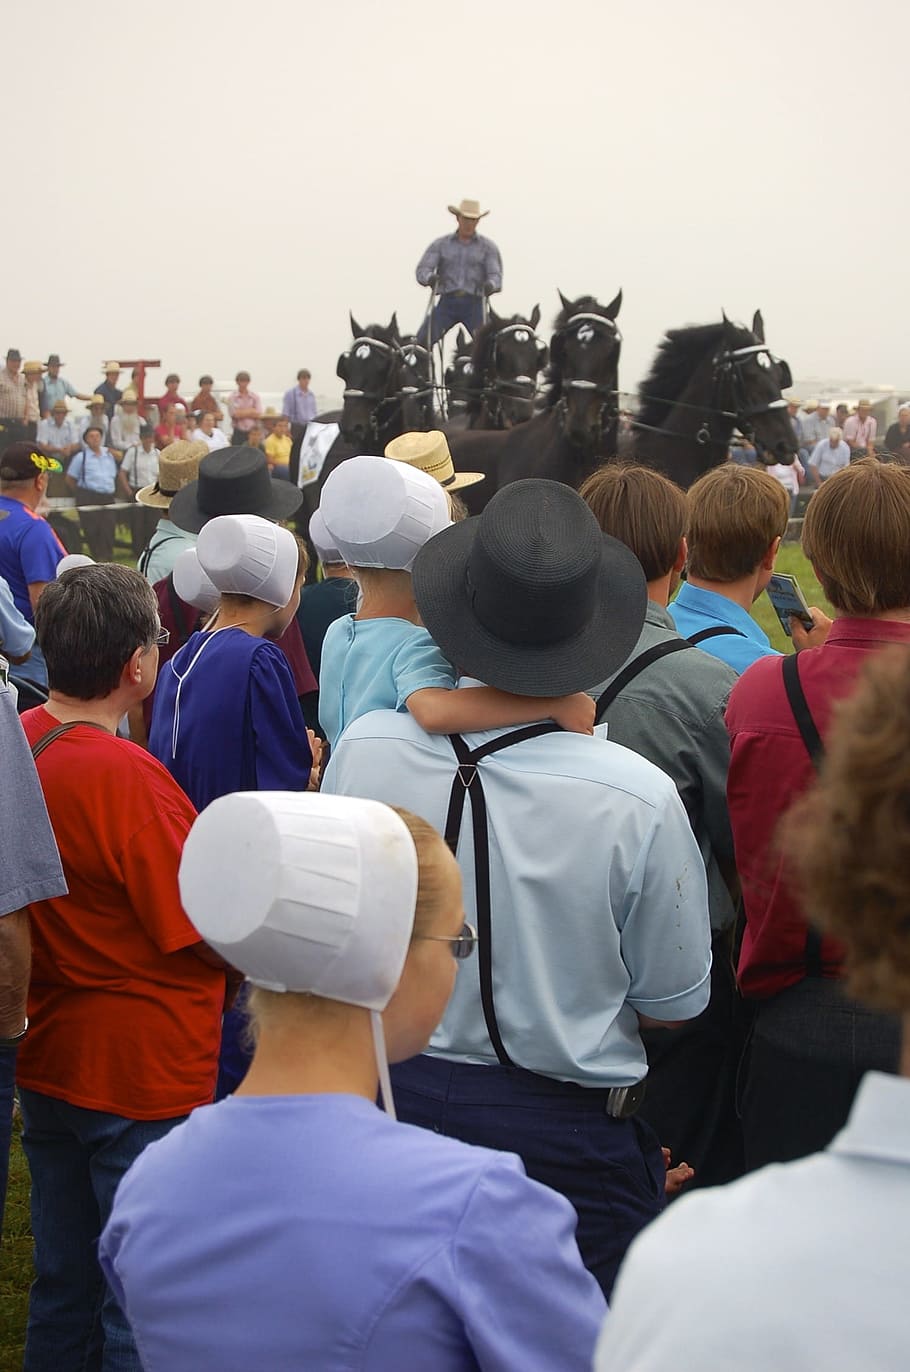 Amish, Persons, Man, Women, People, amish gathering, amish people